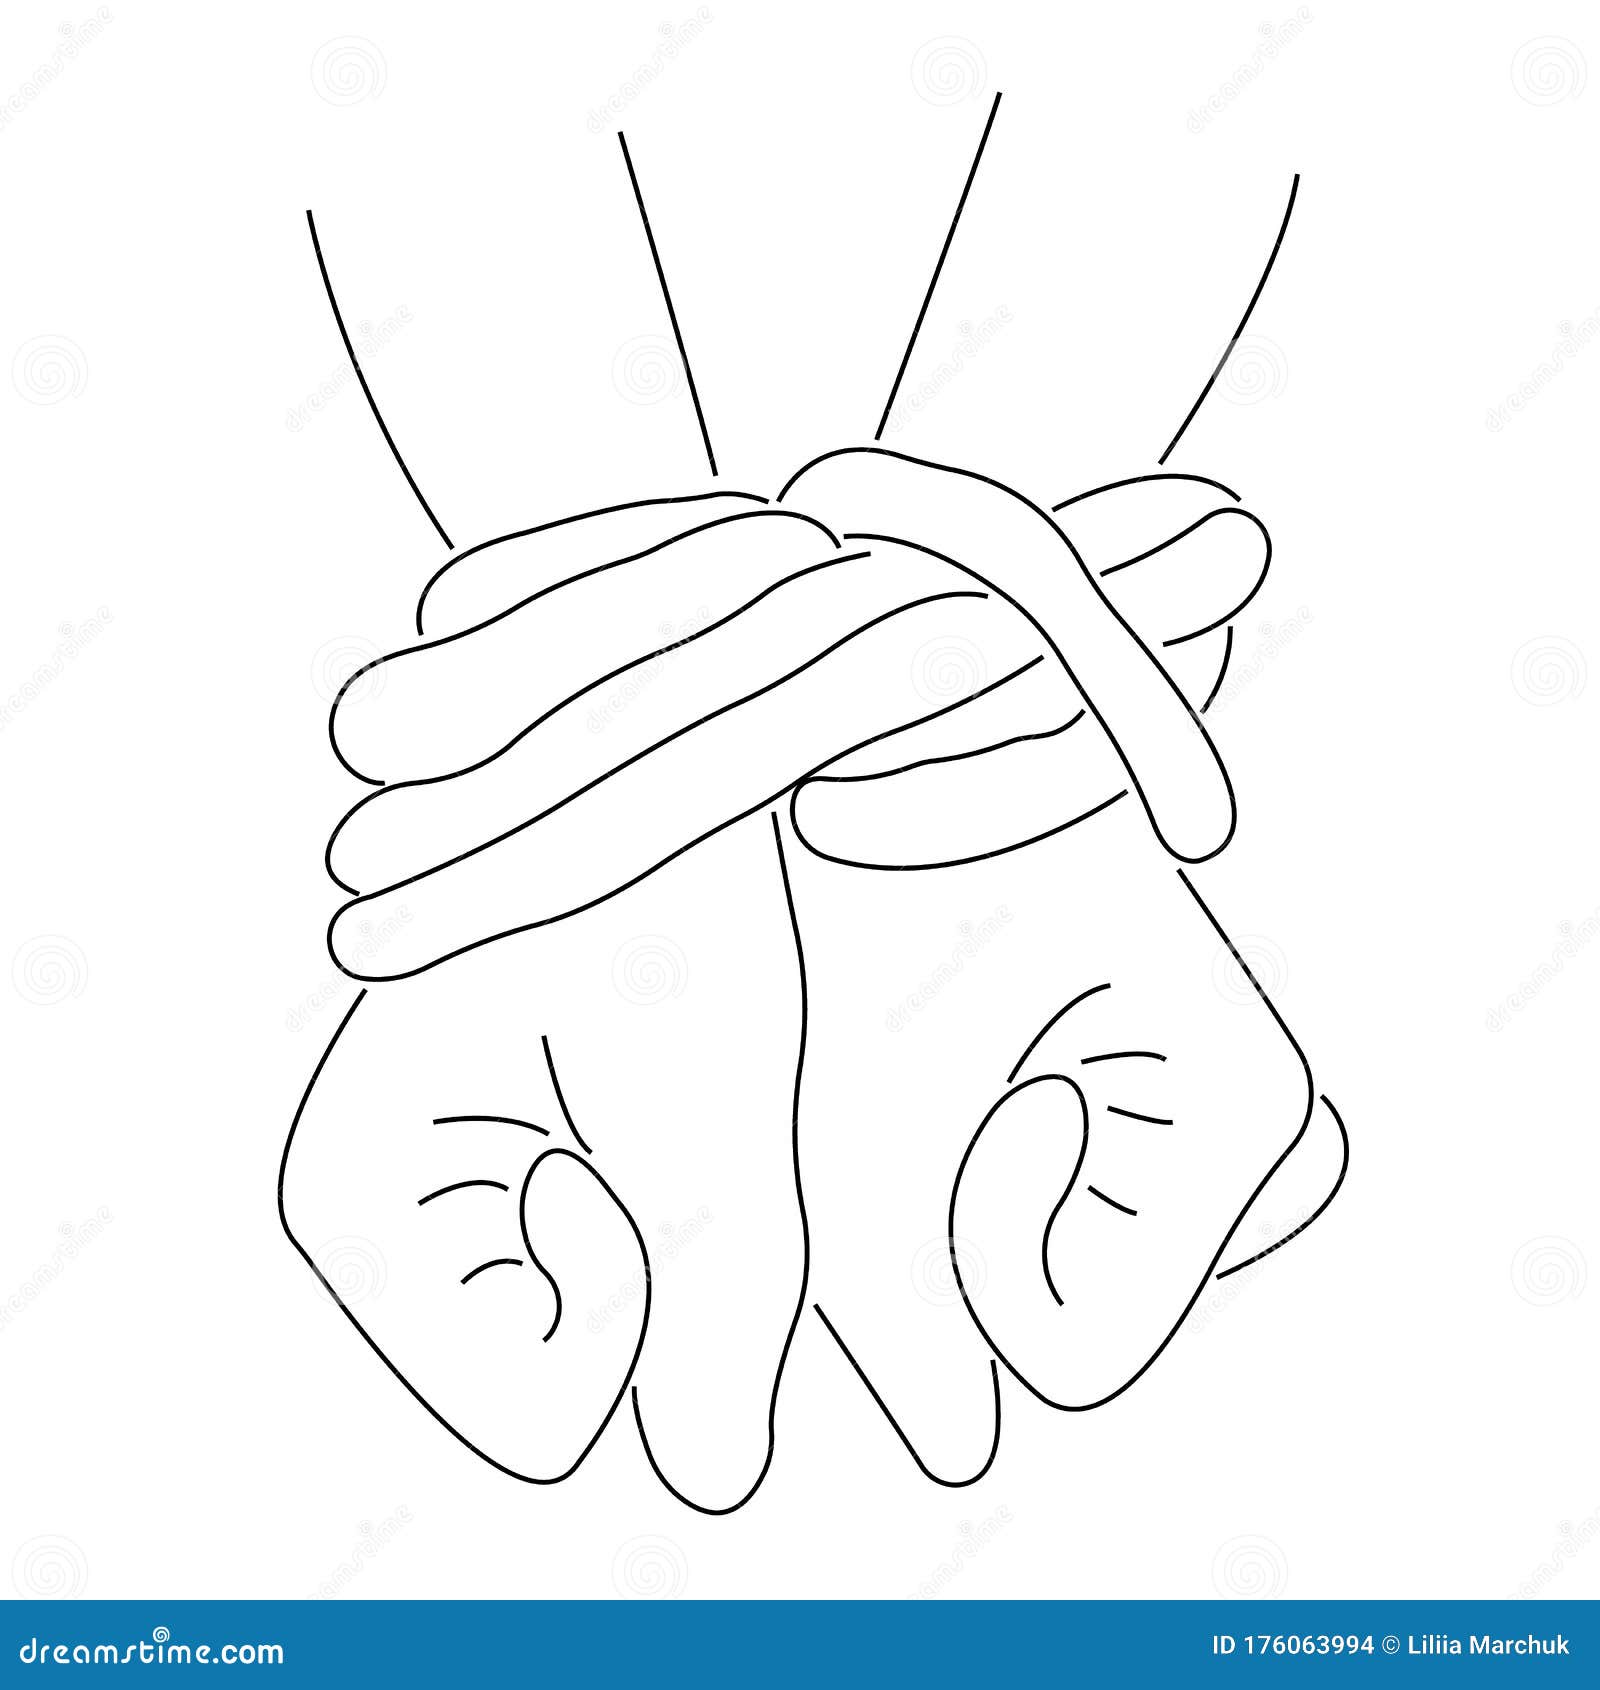 the contour of the hands tied with a rope on the wrist. hopelessness concept,  of slavery